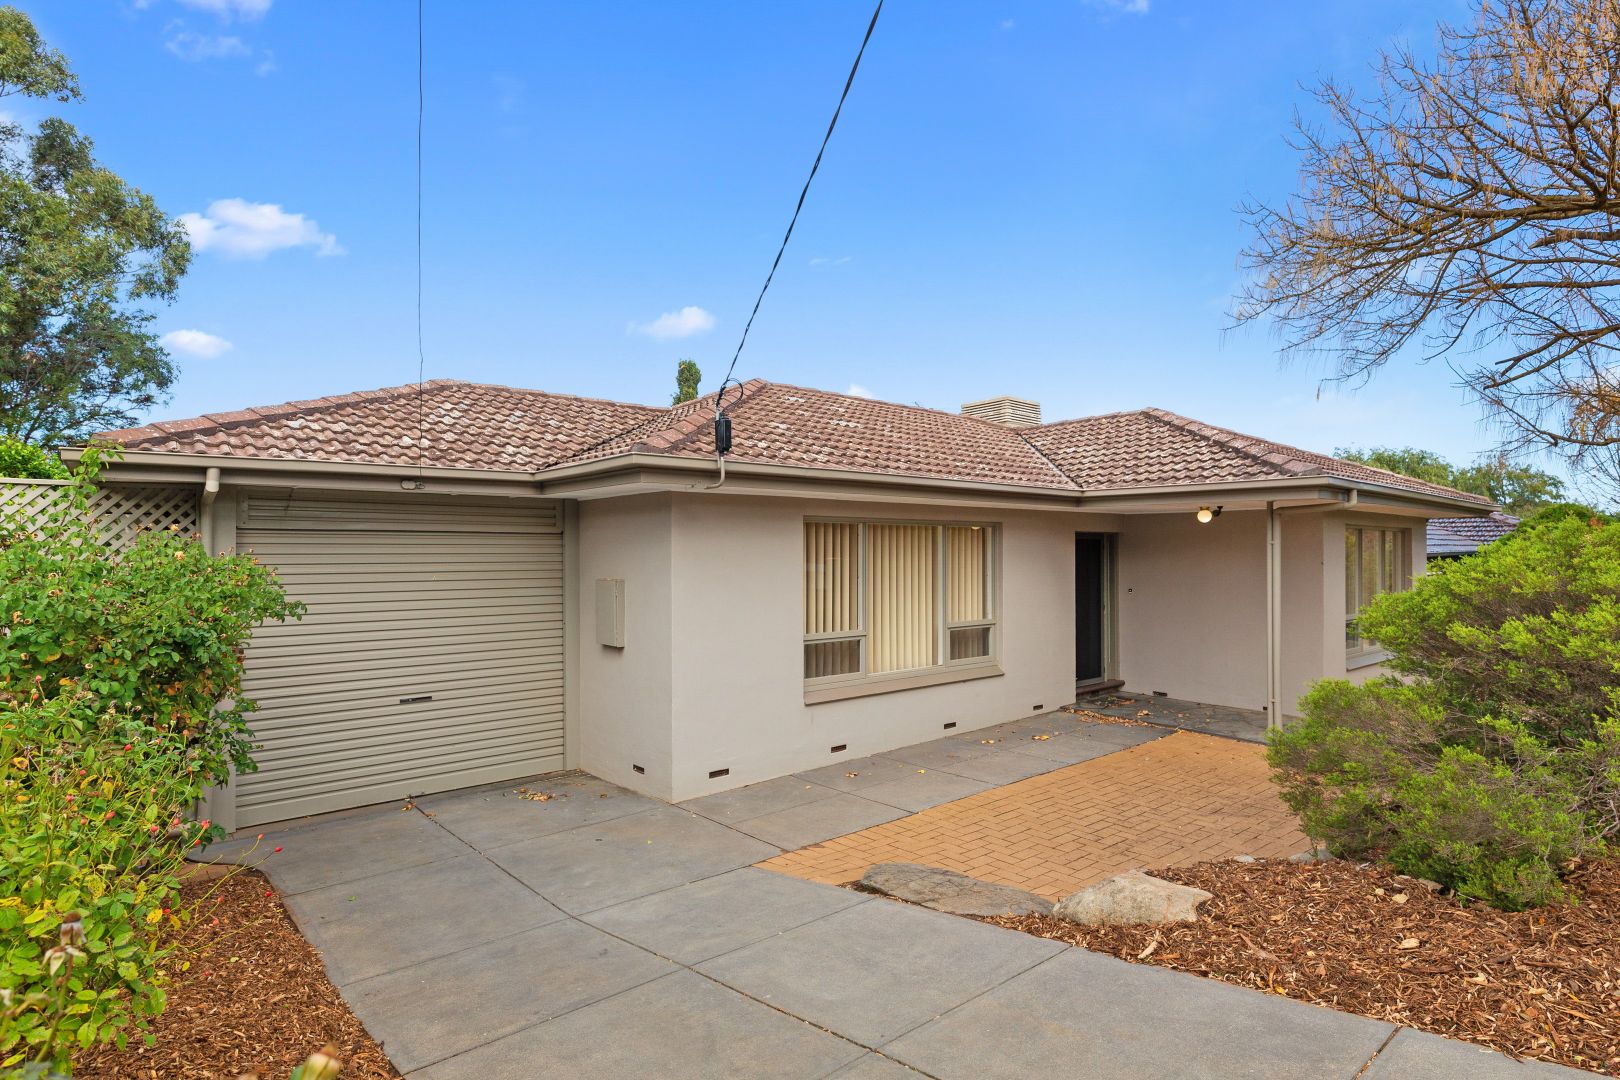 8 Queensferry Road, Old Reynella SA 5161, Image 1